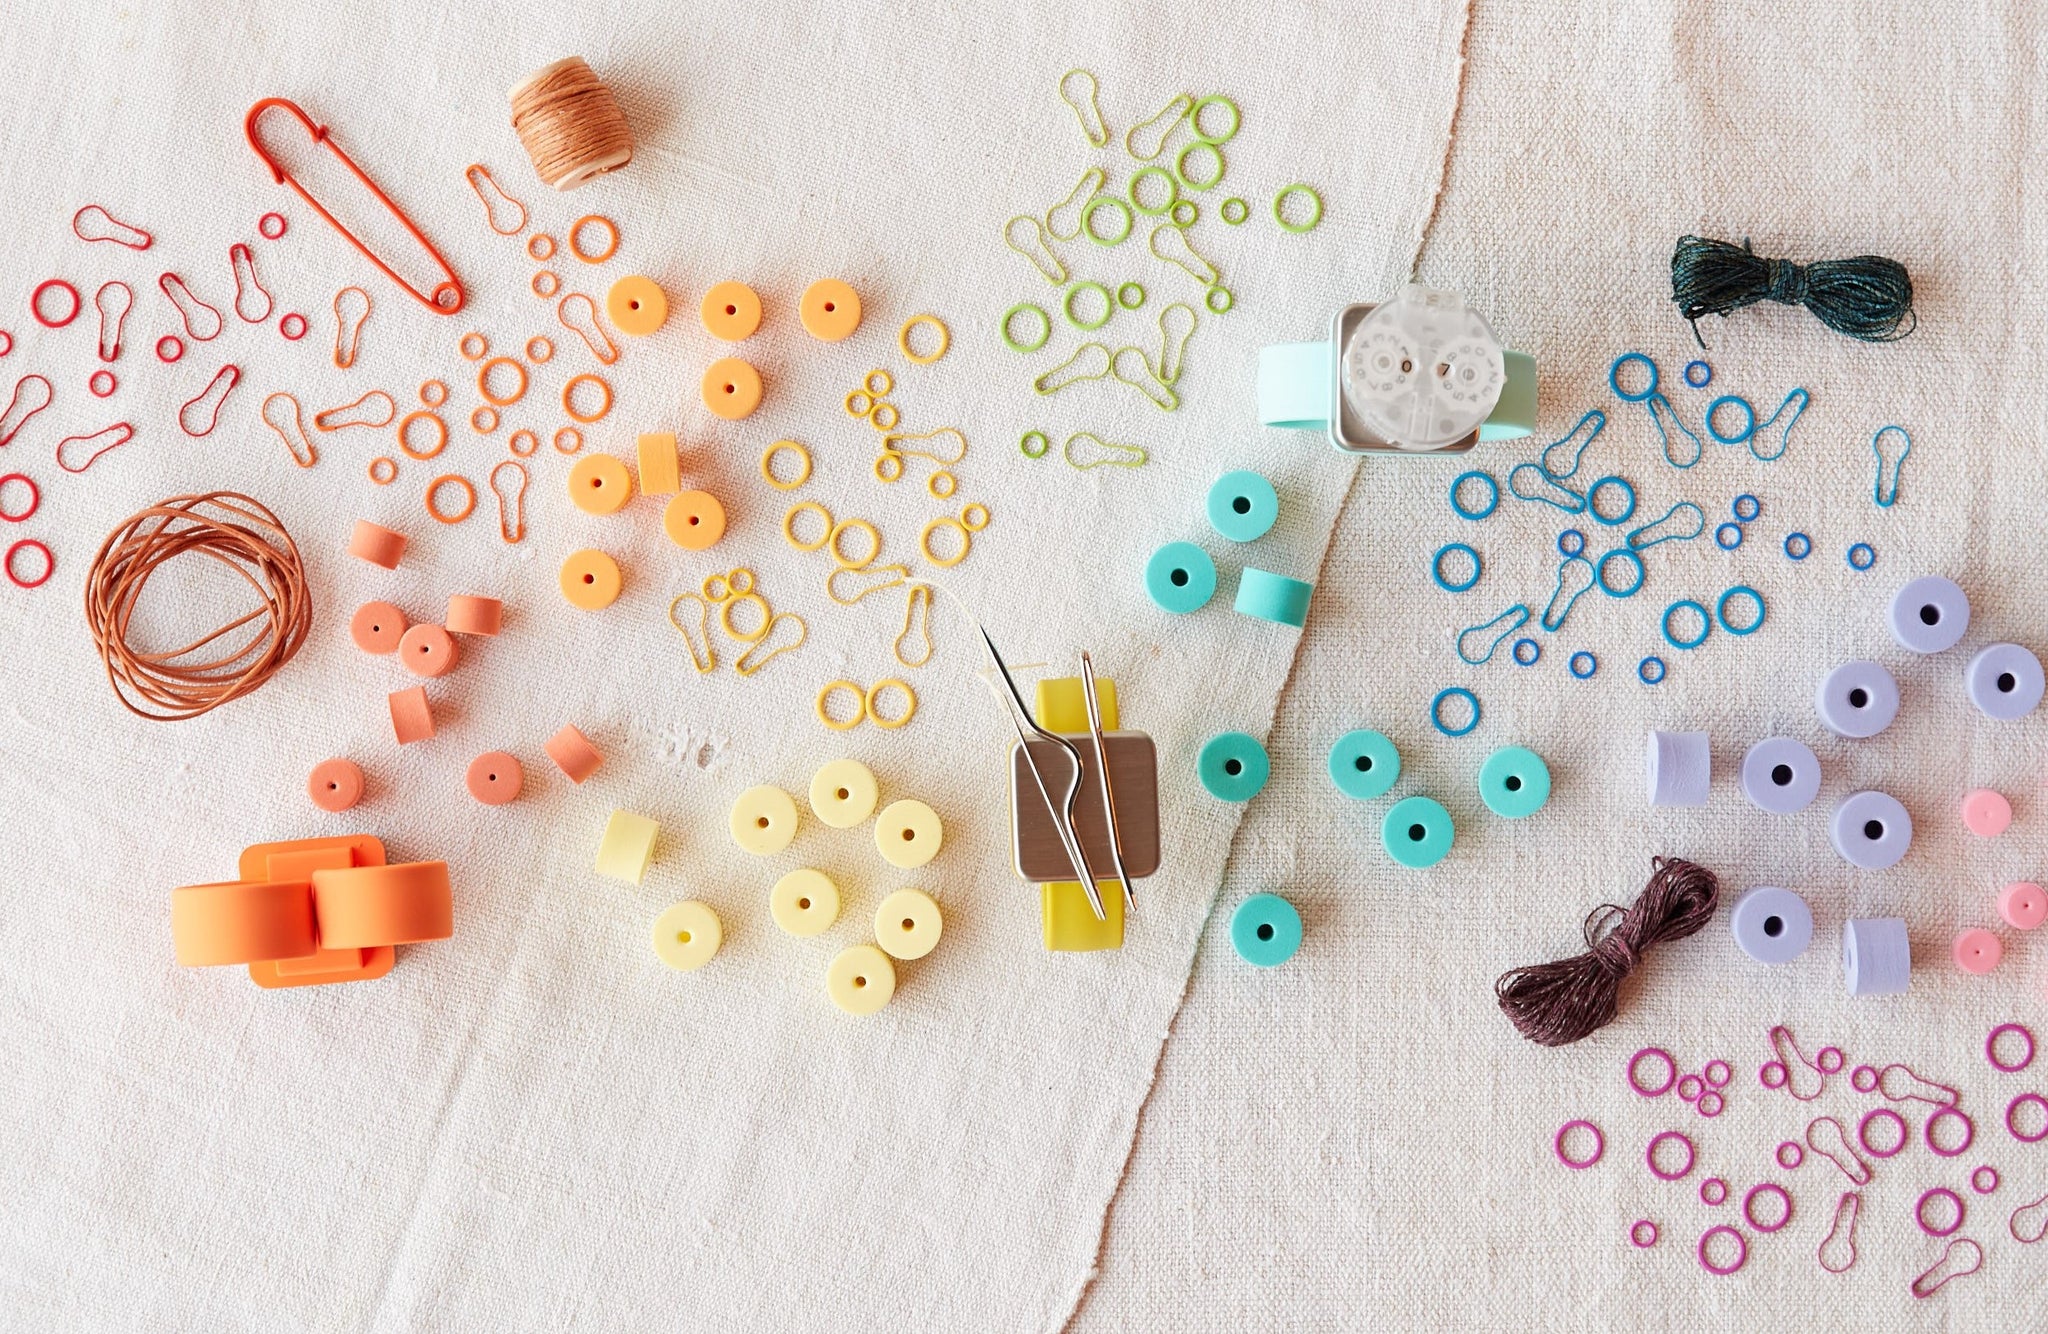 Set of 54 Stitch Markers for Knitting Cocoknits Opening and Round Stitch  Markers Metal Stitch Markers Knitting Markers 